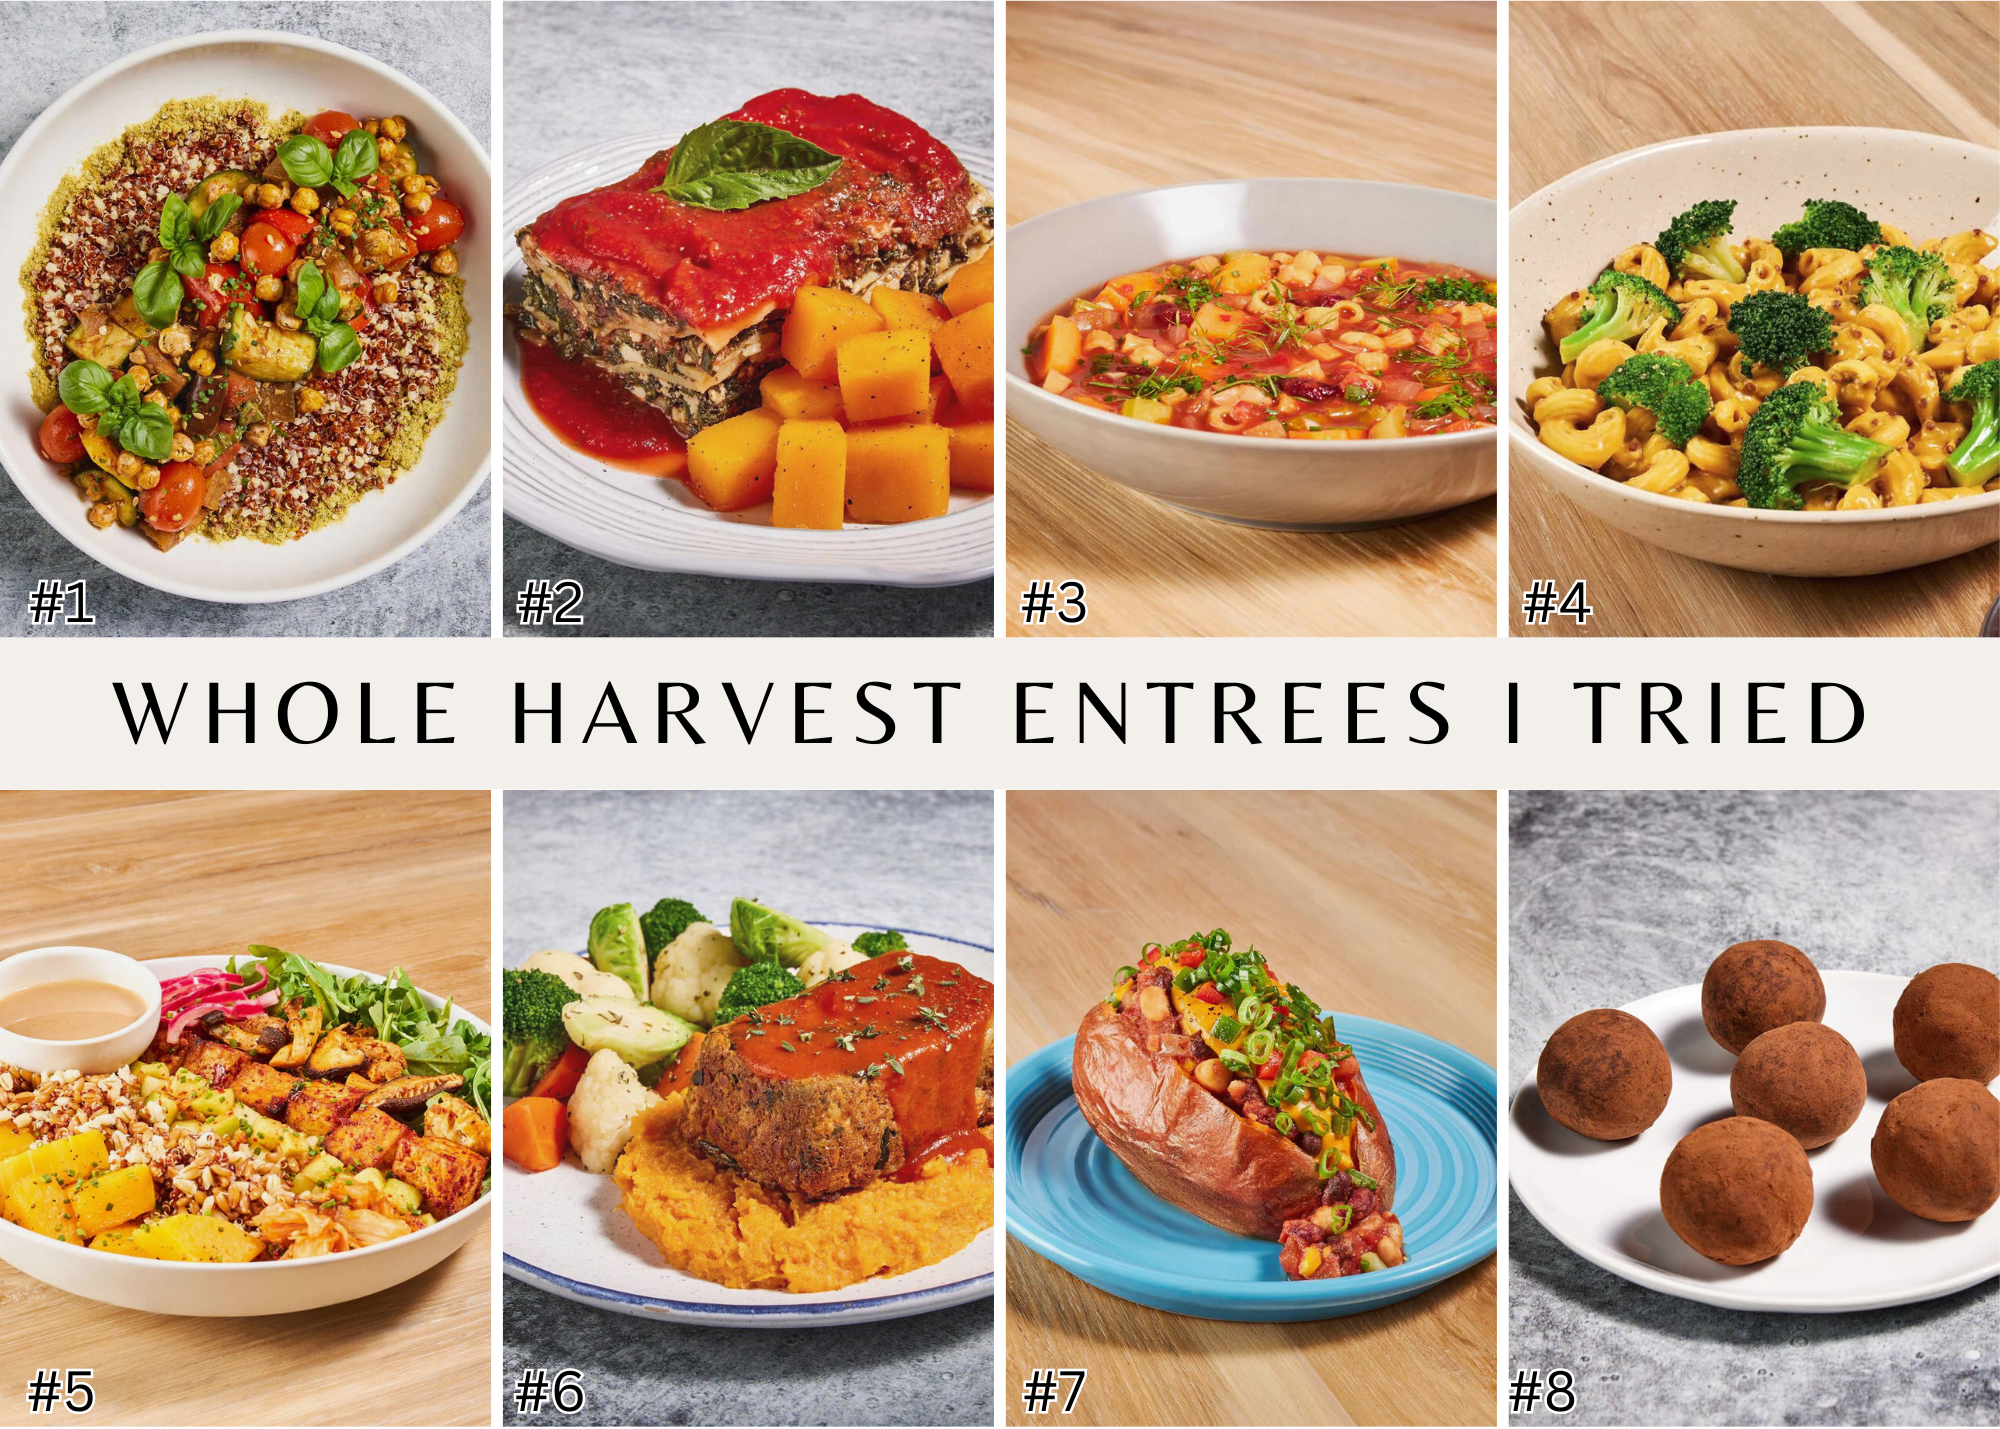 photo collage of 8 whole harvest entrees tried by terri with eatplant-based numbered to correspond with list